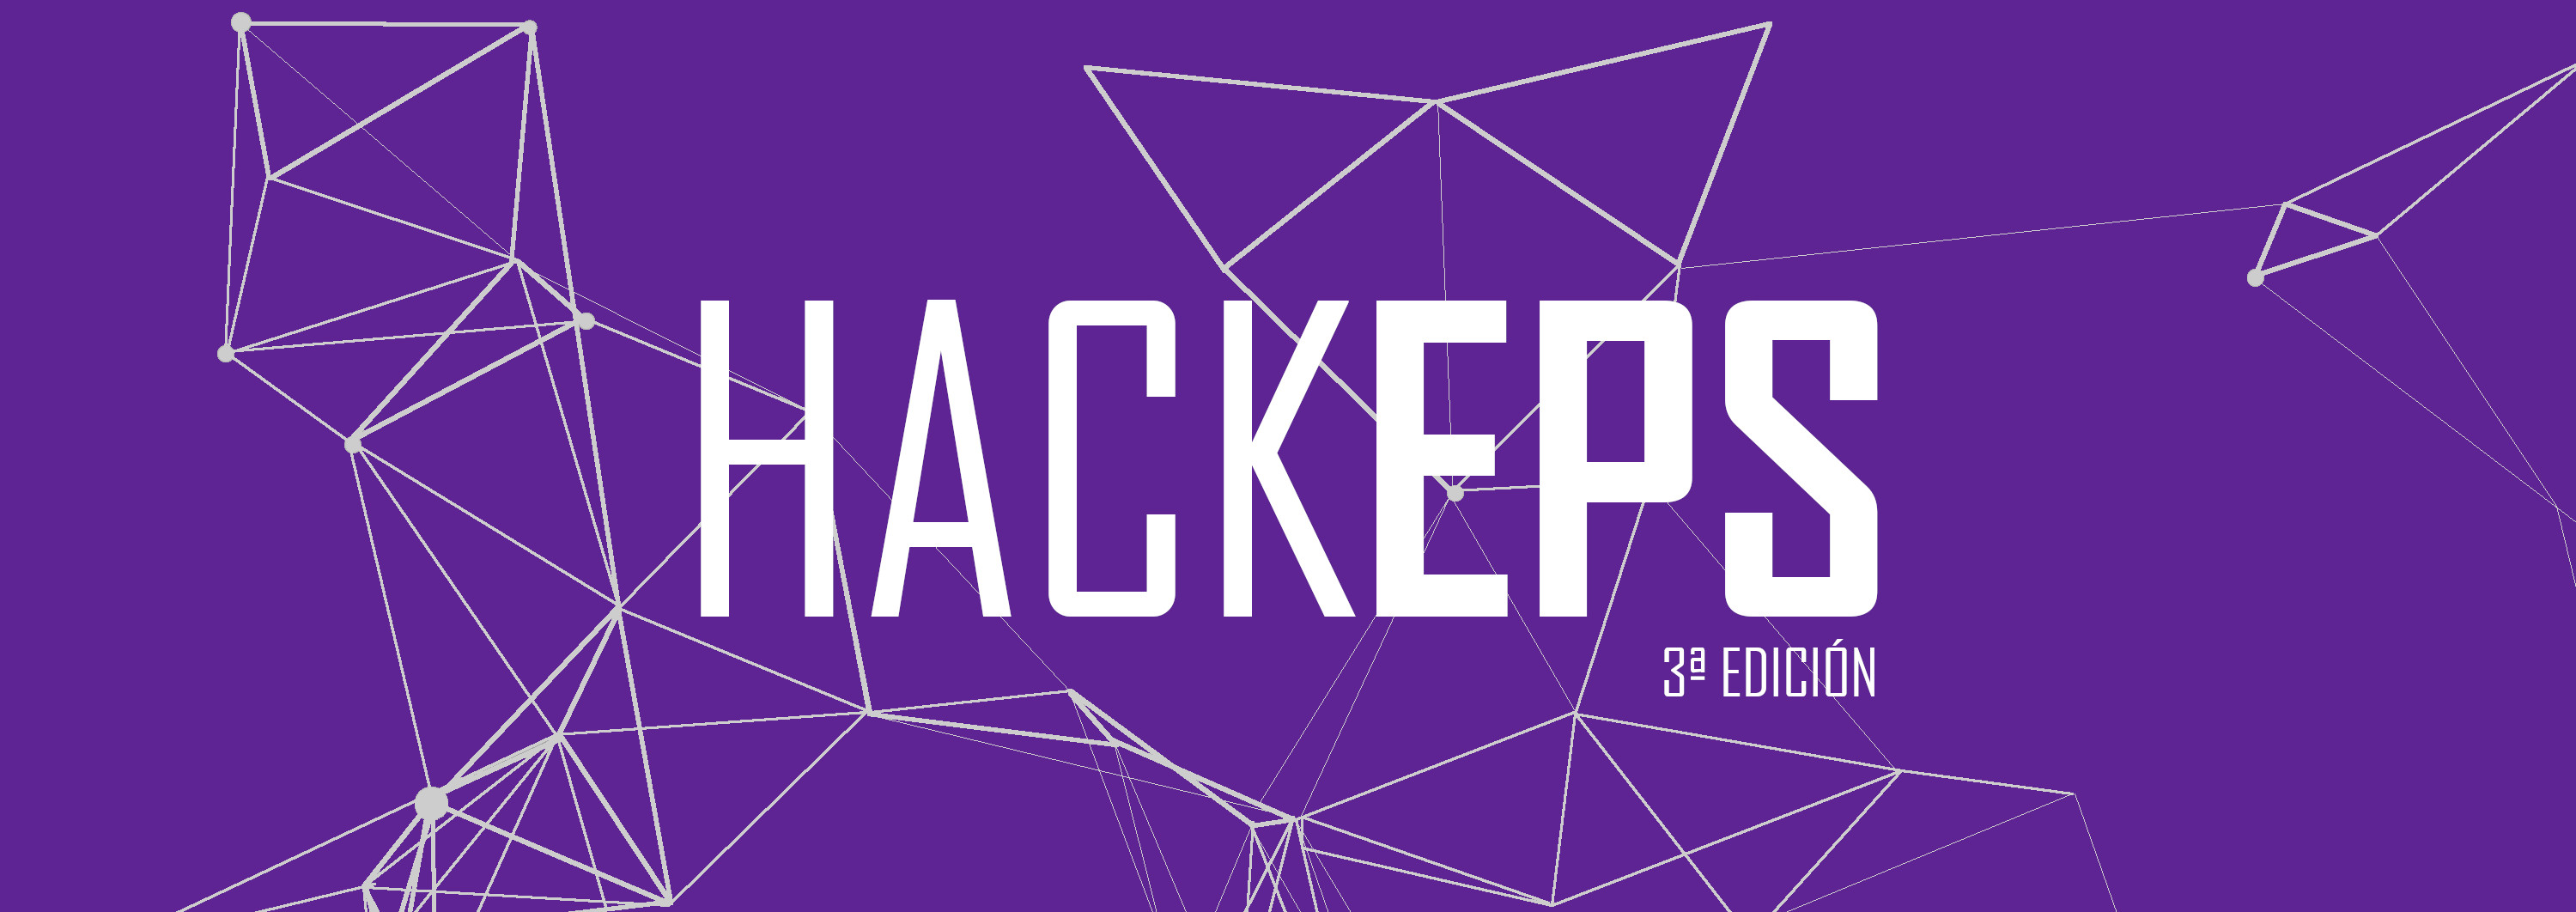 hackeps2019